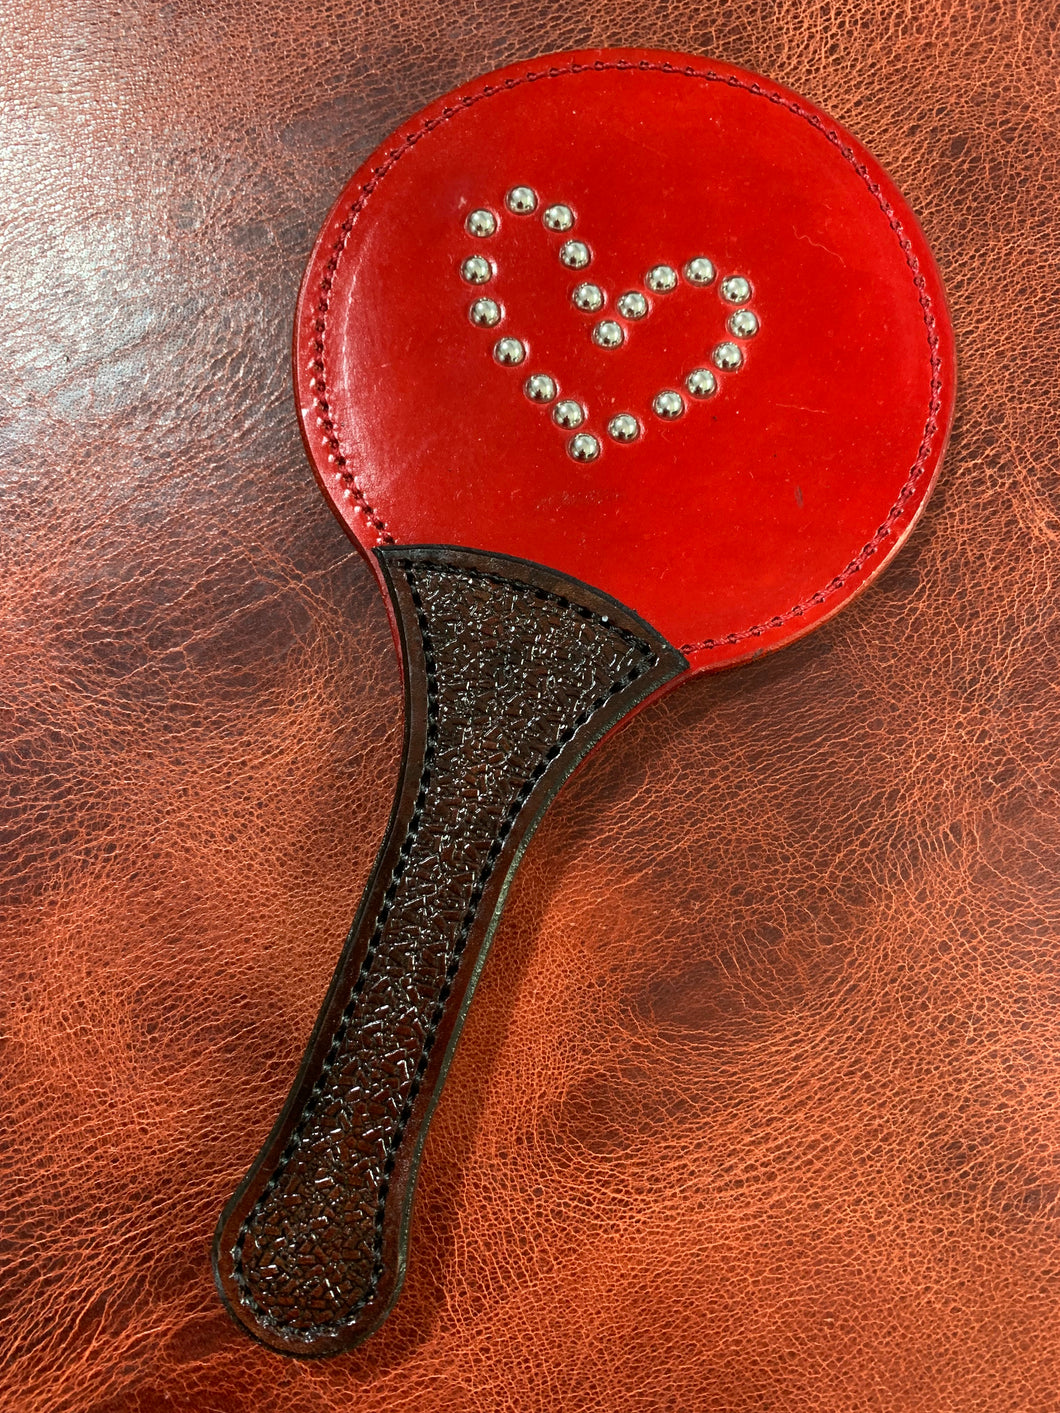 Leather Paddle: Lollipop Style in Red with Dome Rivets in a Heart Design